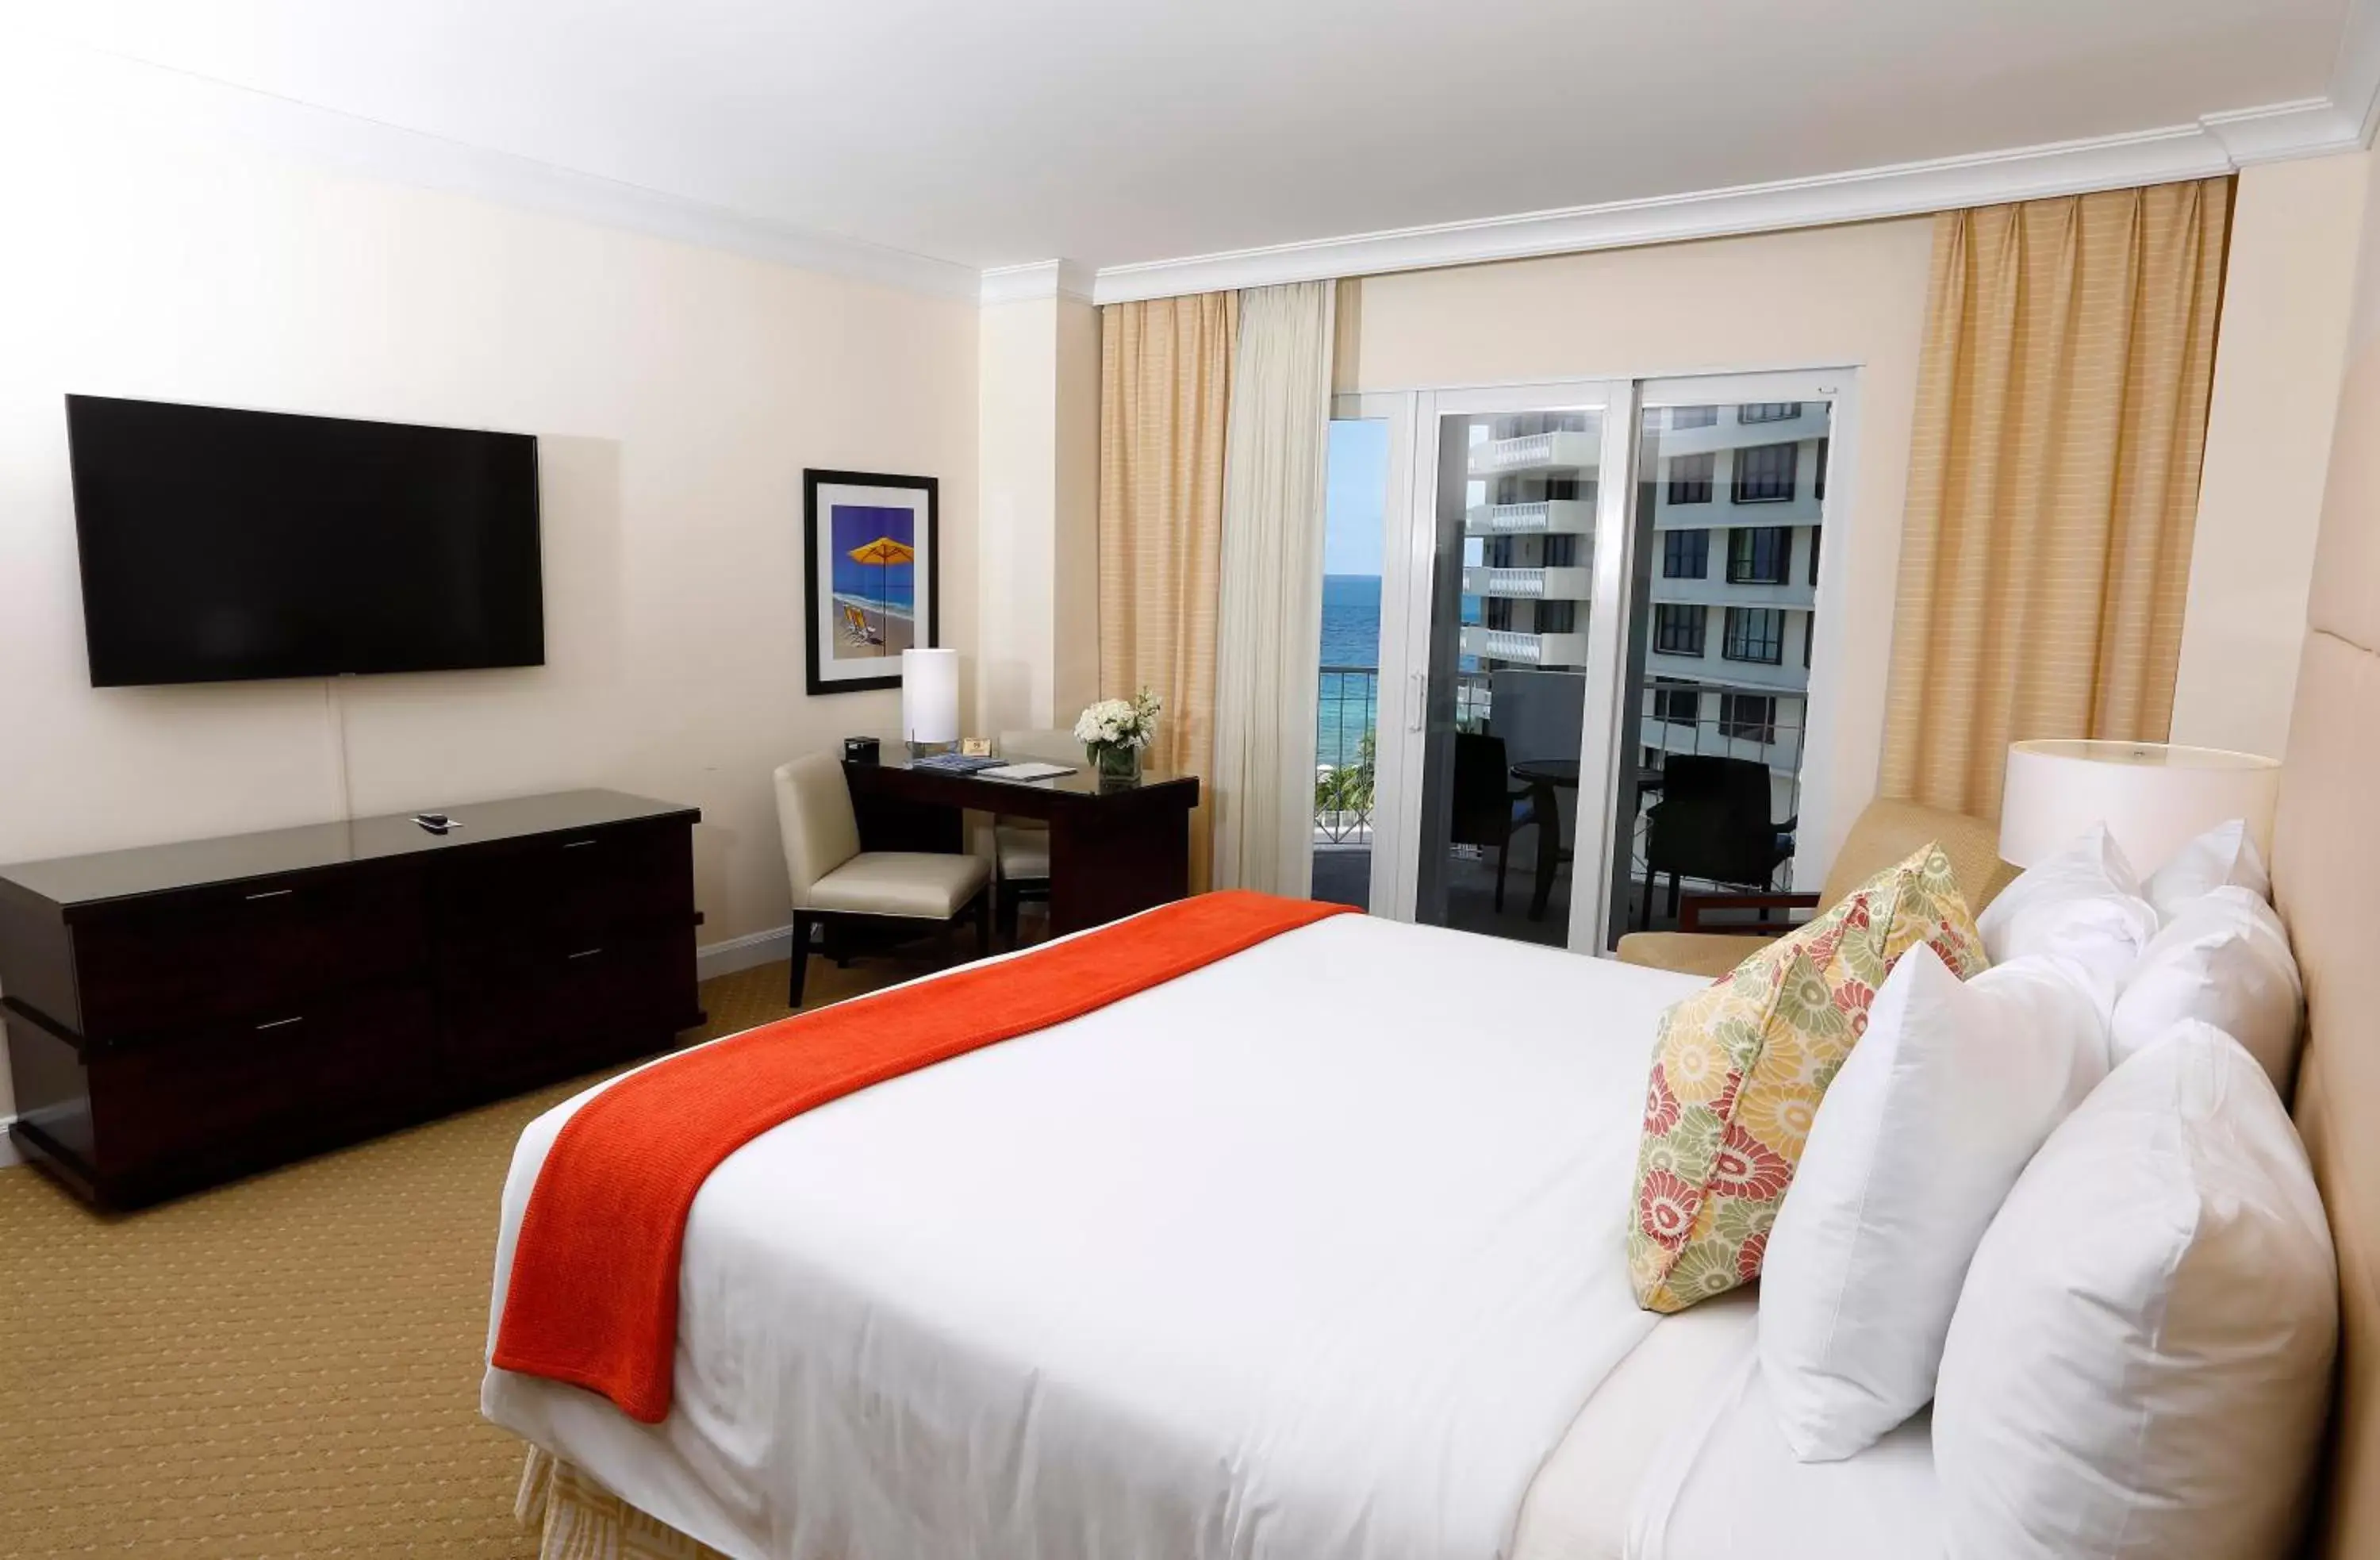 Deluxe King Room with Partial Ocean View and Balcony in Sea View Hotel